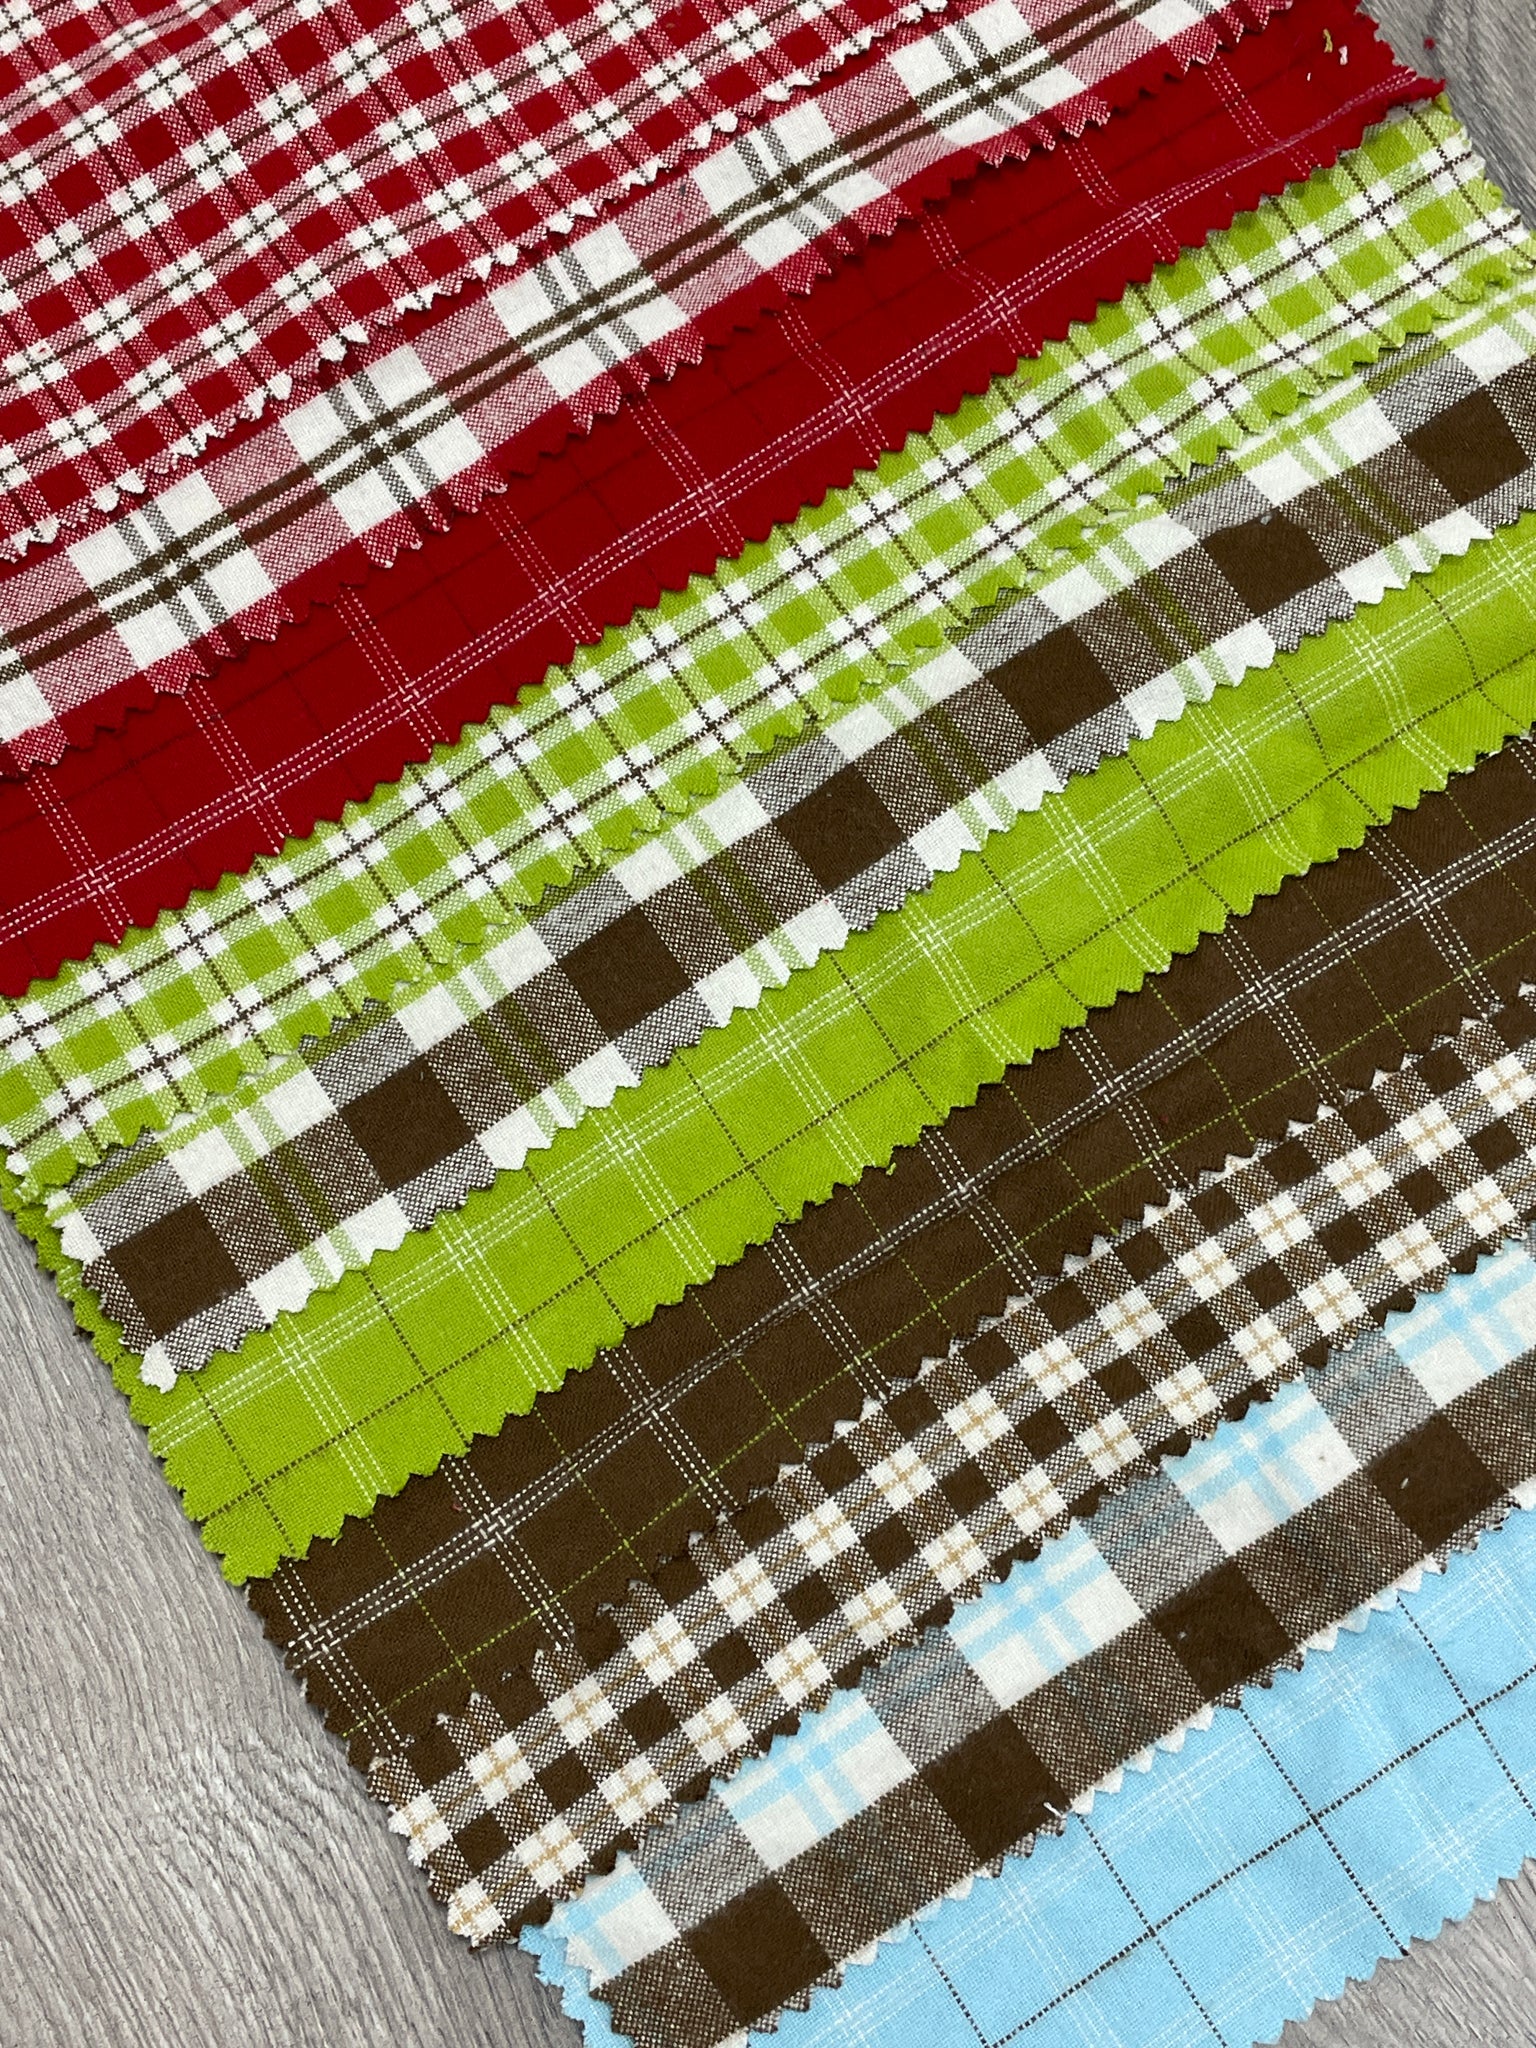 Cotton Flannel Swatchbook - Yarn-Dyed Plaids